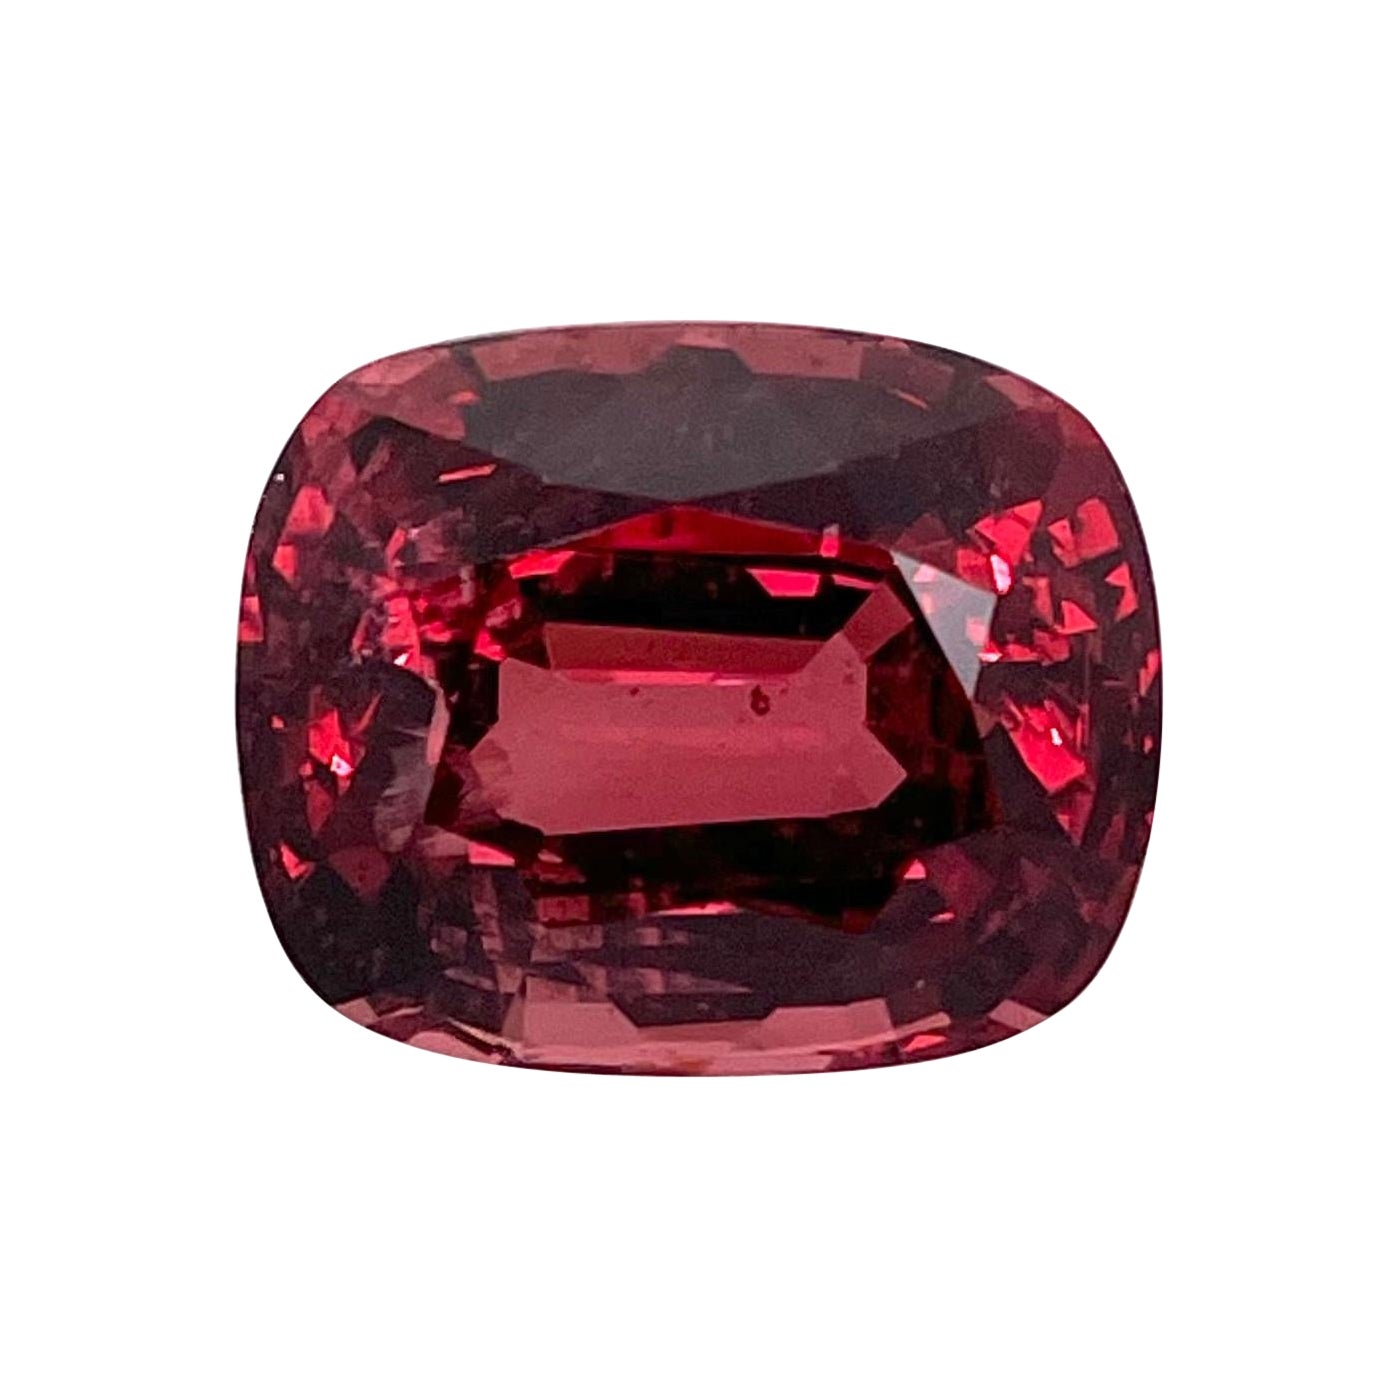 9.46 Carat Cushion Cut Red Spinel Loose Gemstone For Sale